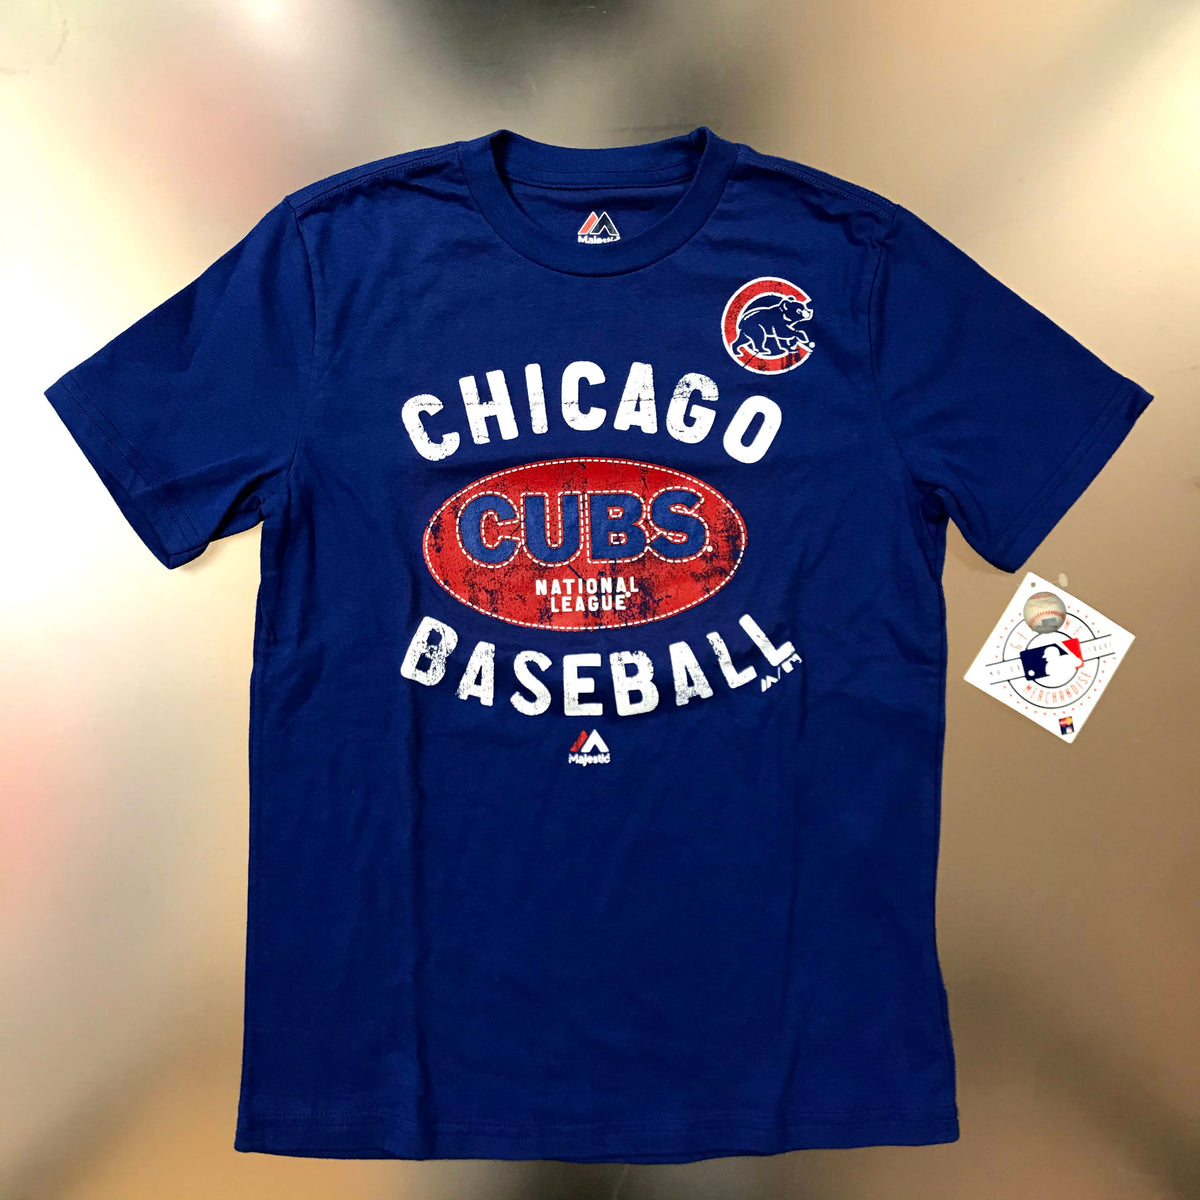 Youth Royal/Gray Chicago Cubs Officials Practice T-Shirt